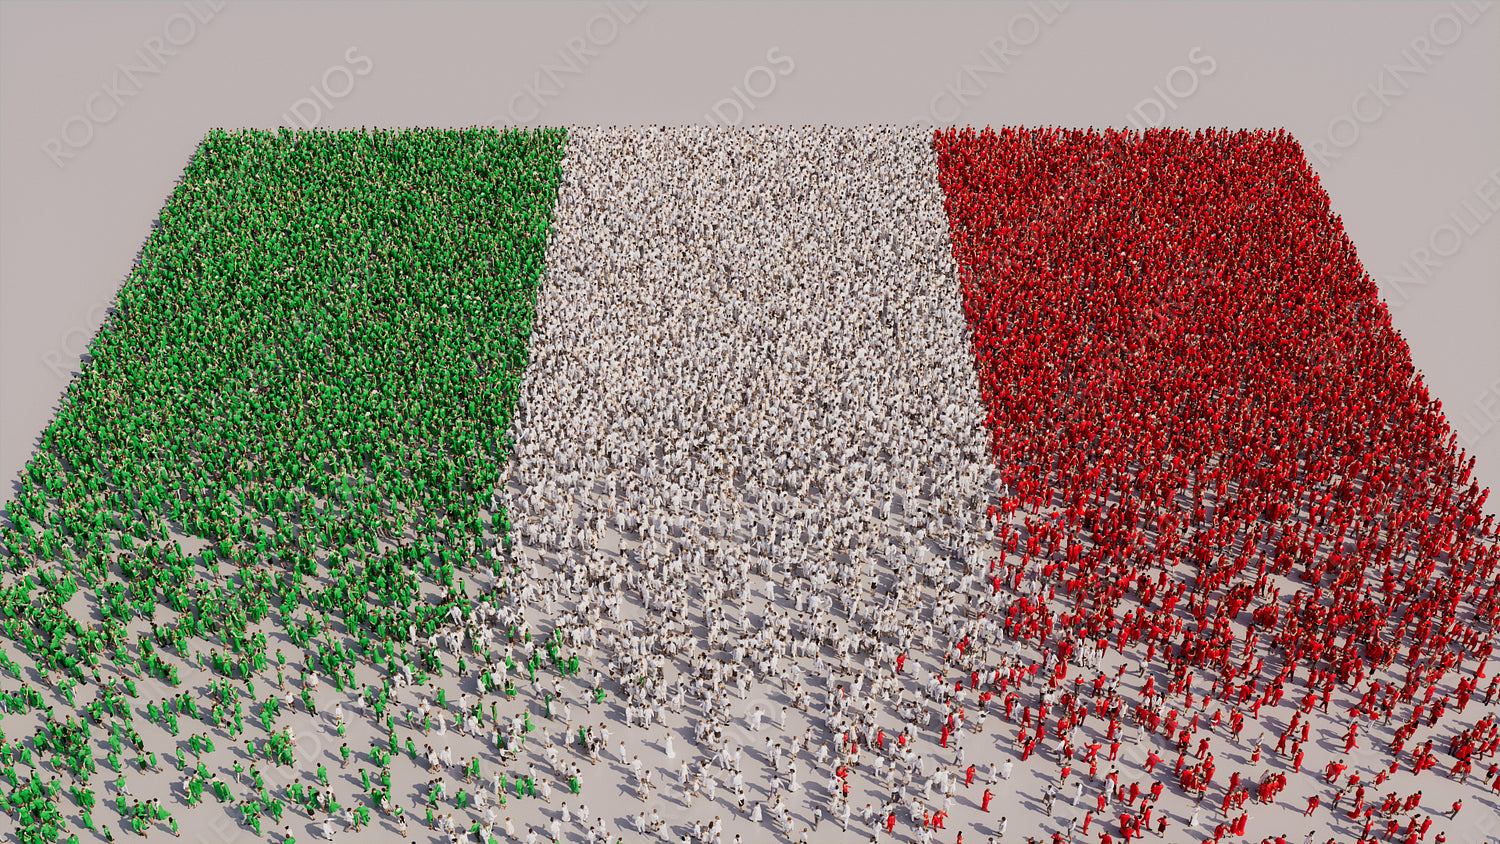 Italian Flag formed from a Crowd of People. Banner of Italy on White.